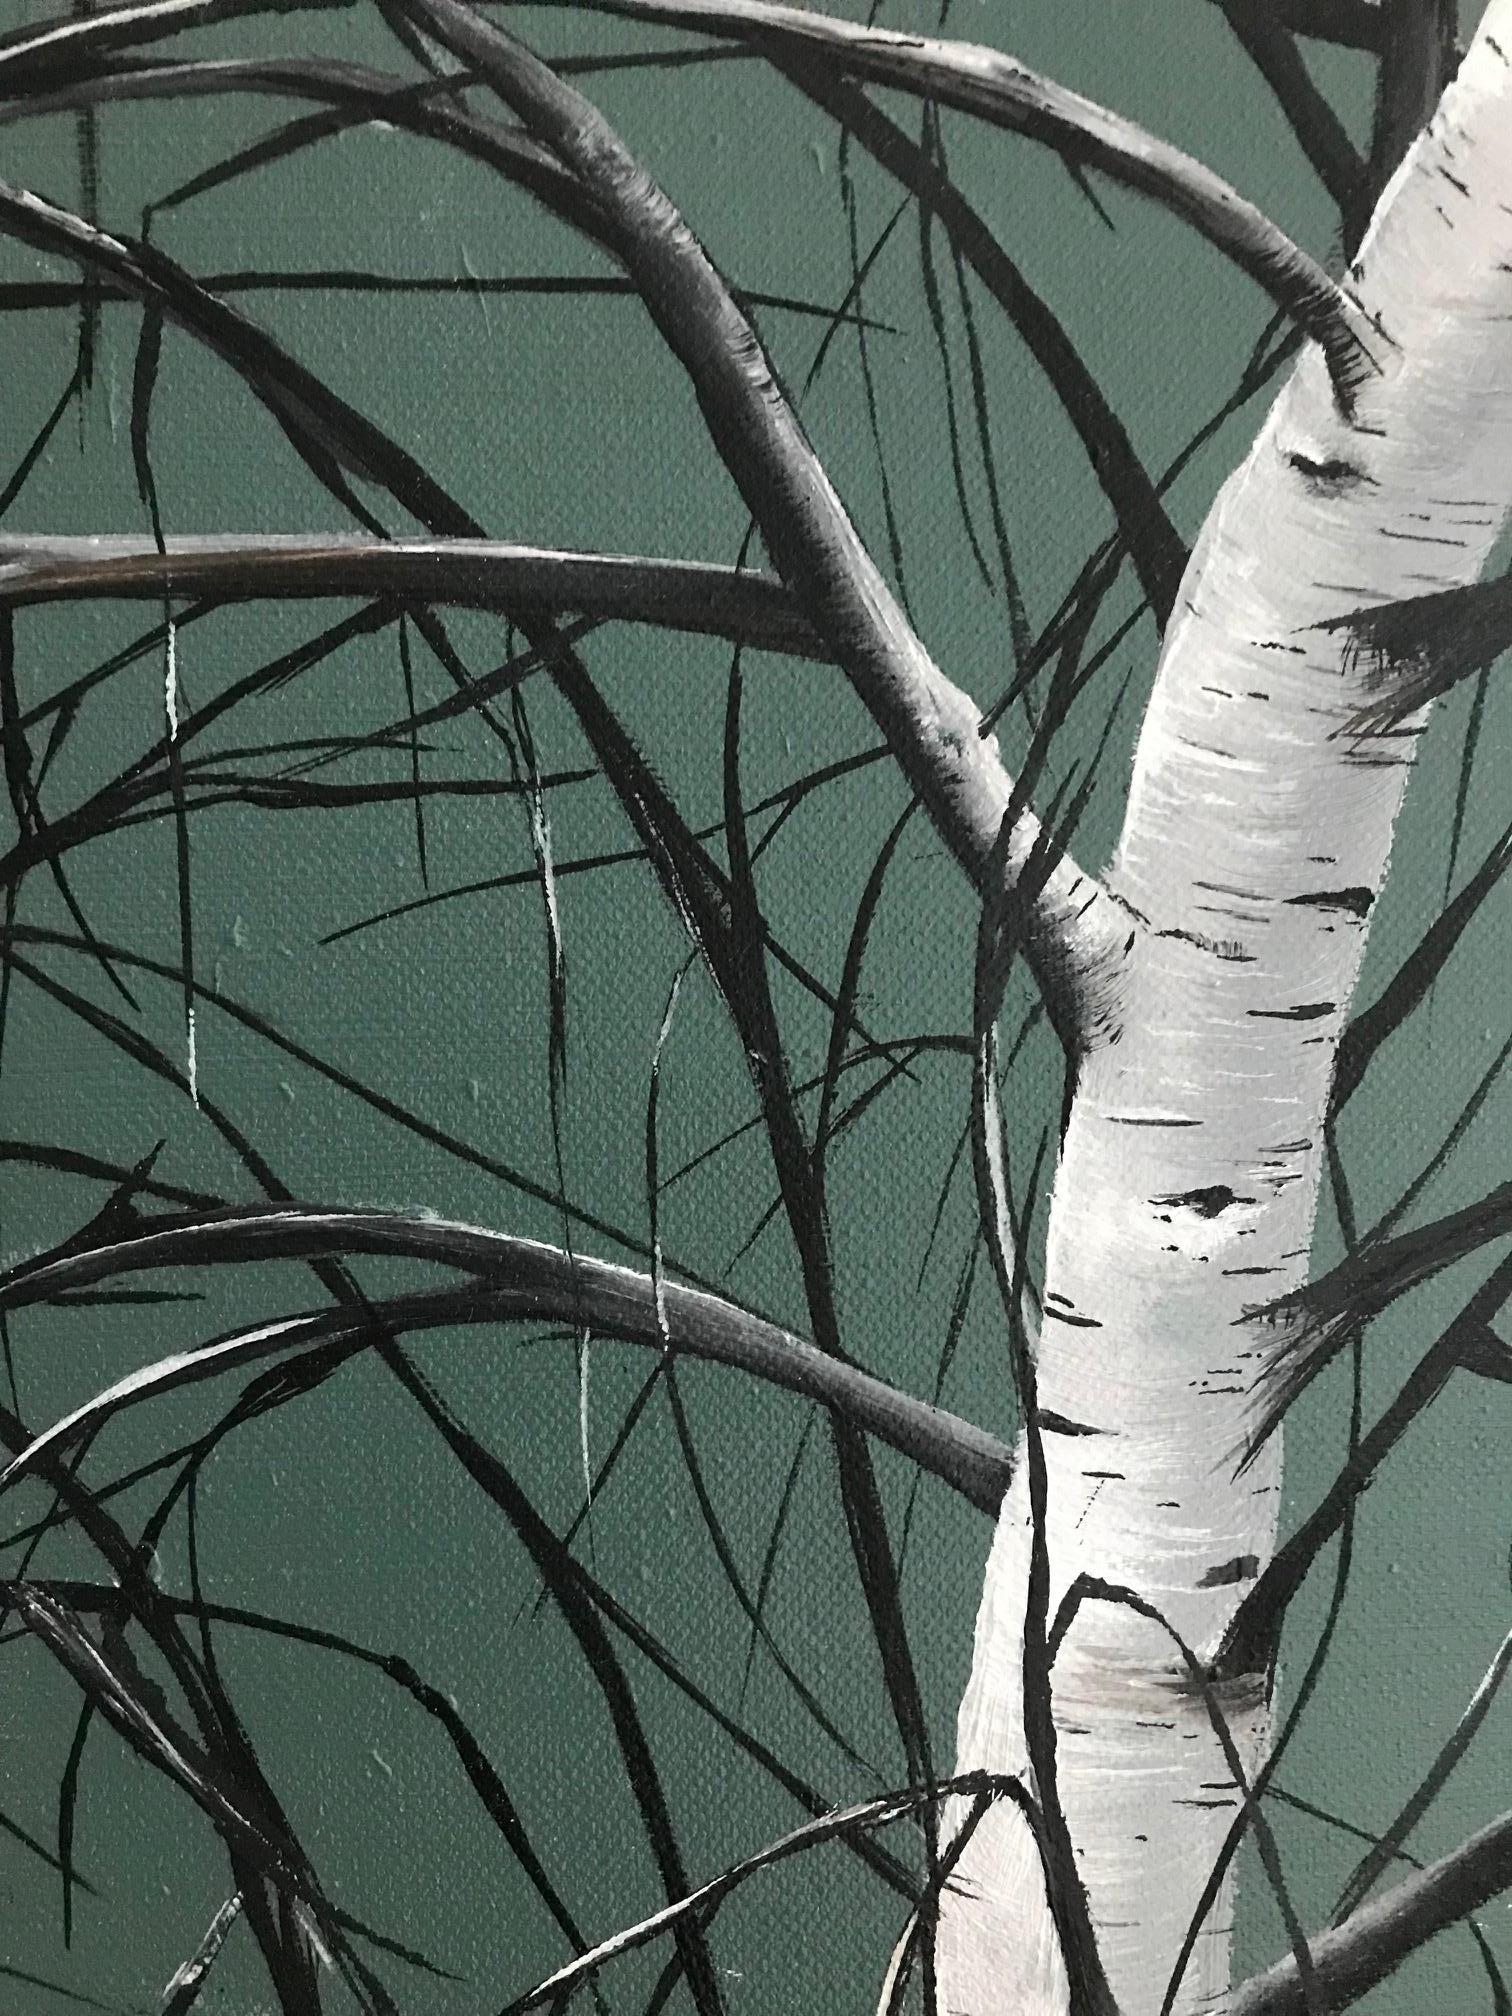 “Battling Lovers” is part of a series of representational arboreal paintings by Allison Green. It depicts two thin, bare white birch trees with tangled branches veering in opposite directions against a dark green background. Green’s work is often